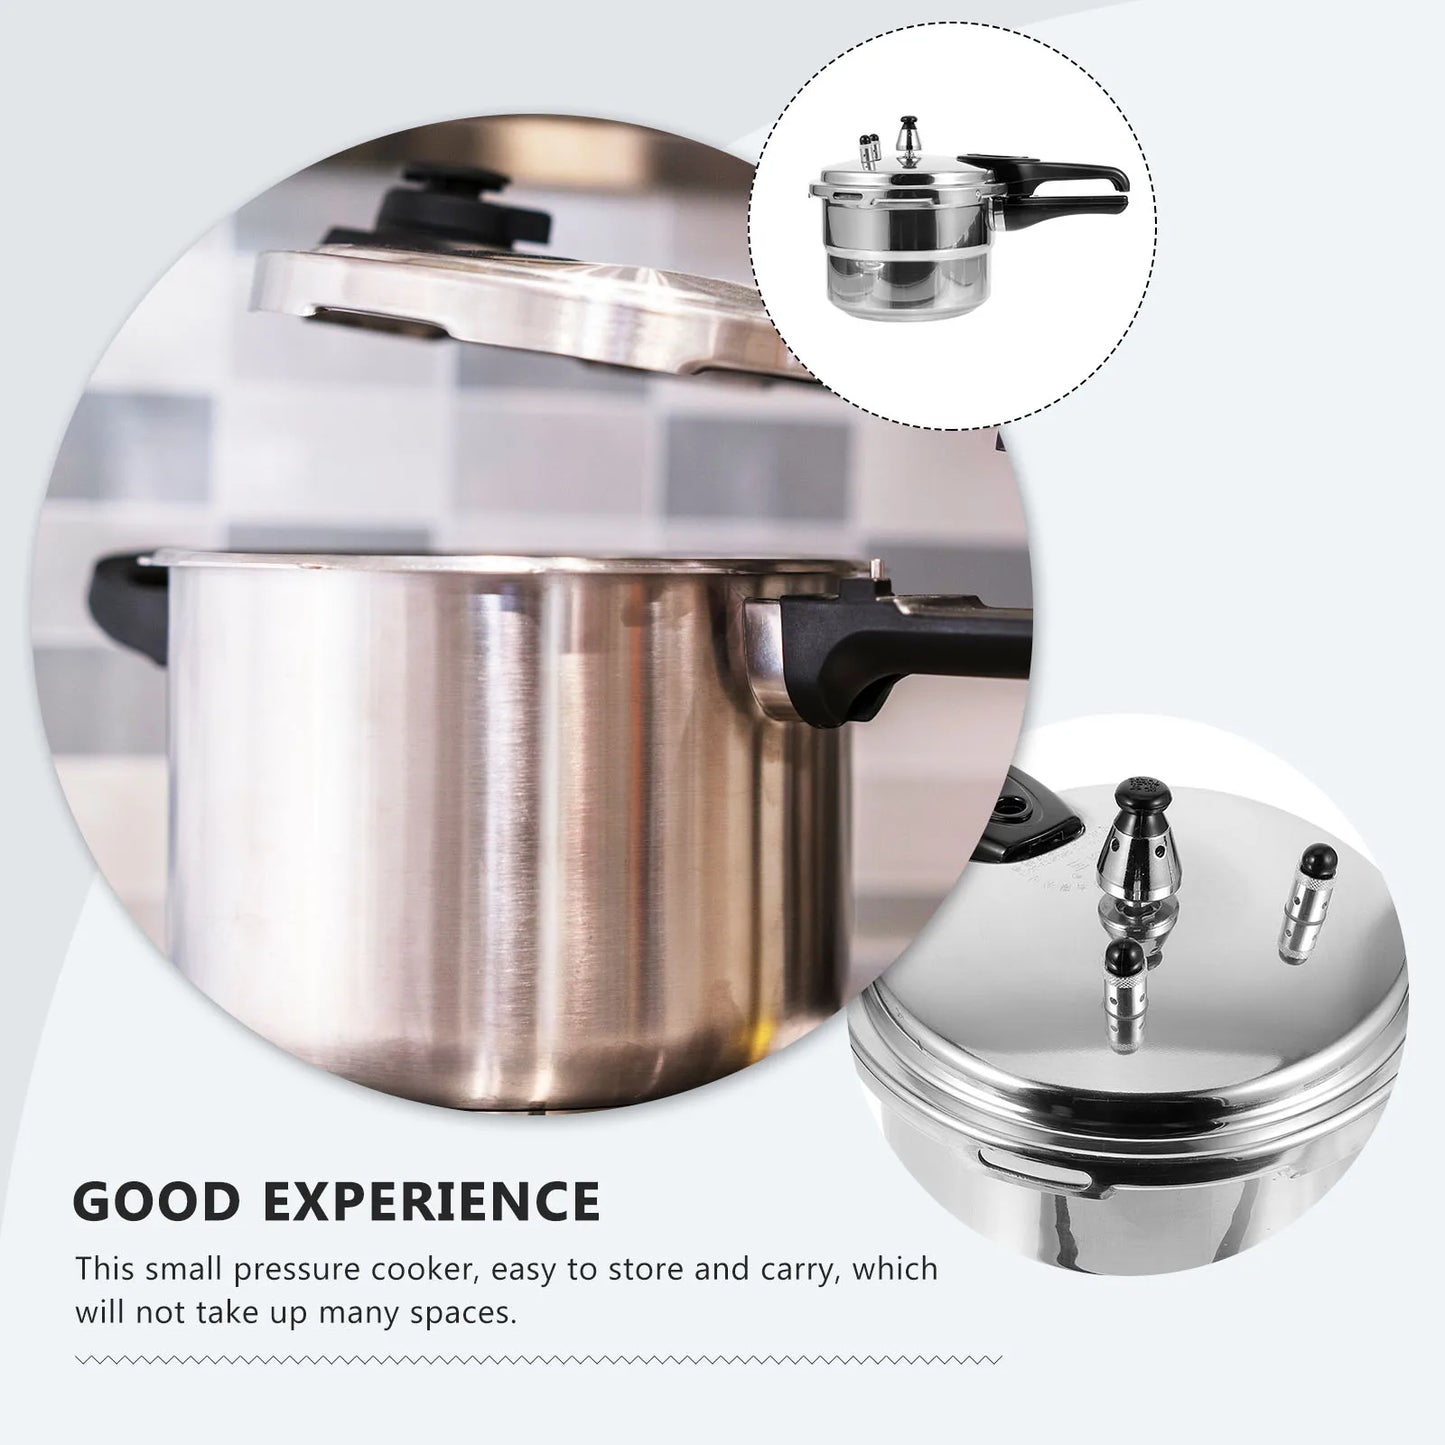 Pressure Canners For Canning
High Pressure Gas Stove
Cookware Soup Meat Pot
Aluminum Pressure Gas Stove